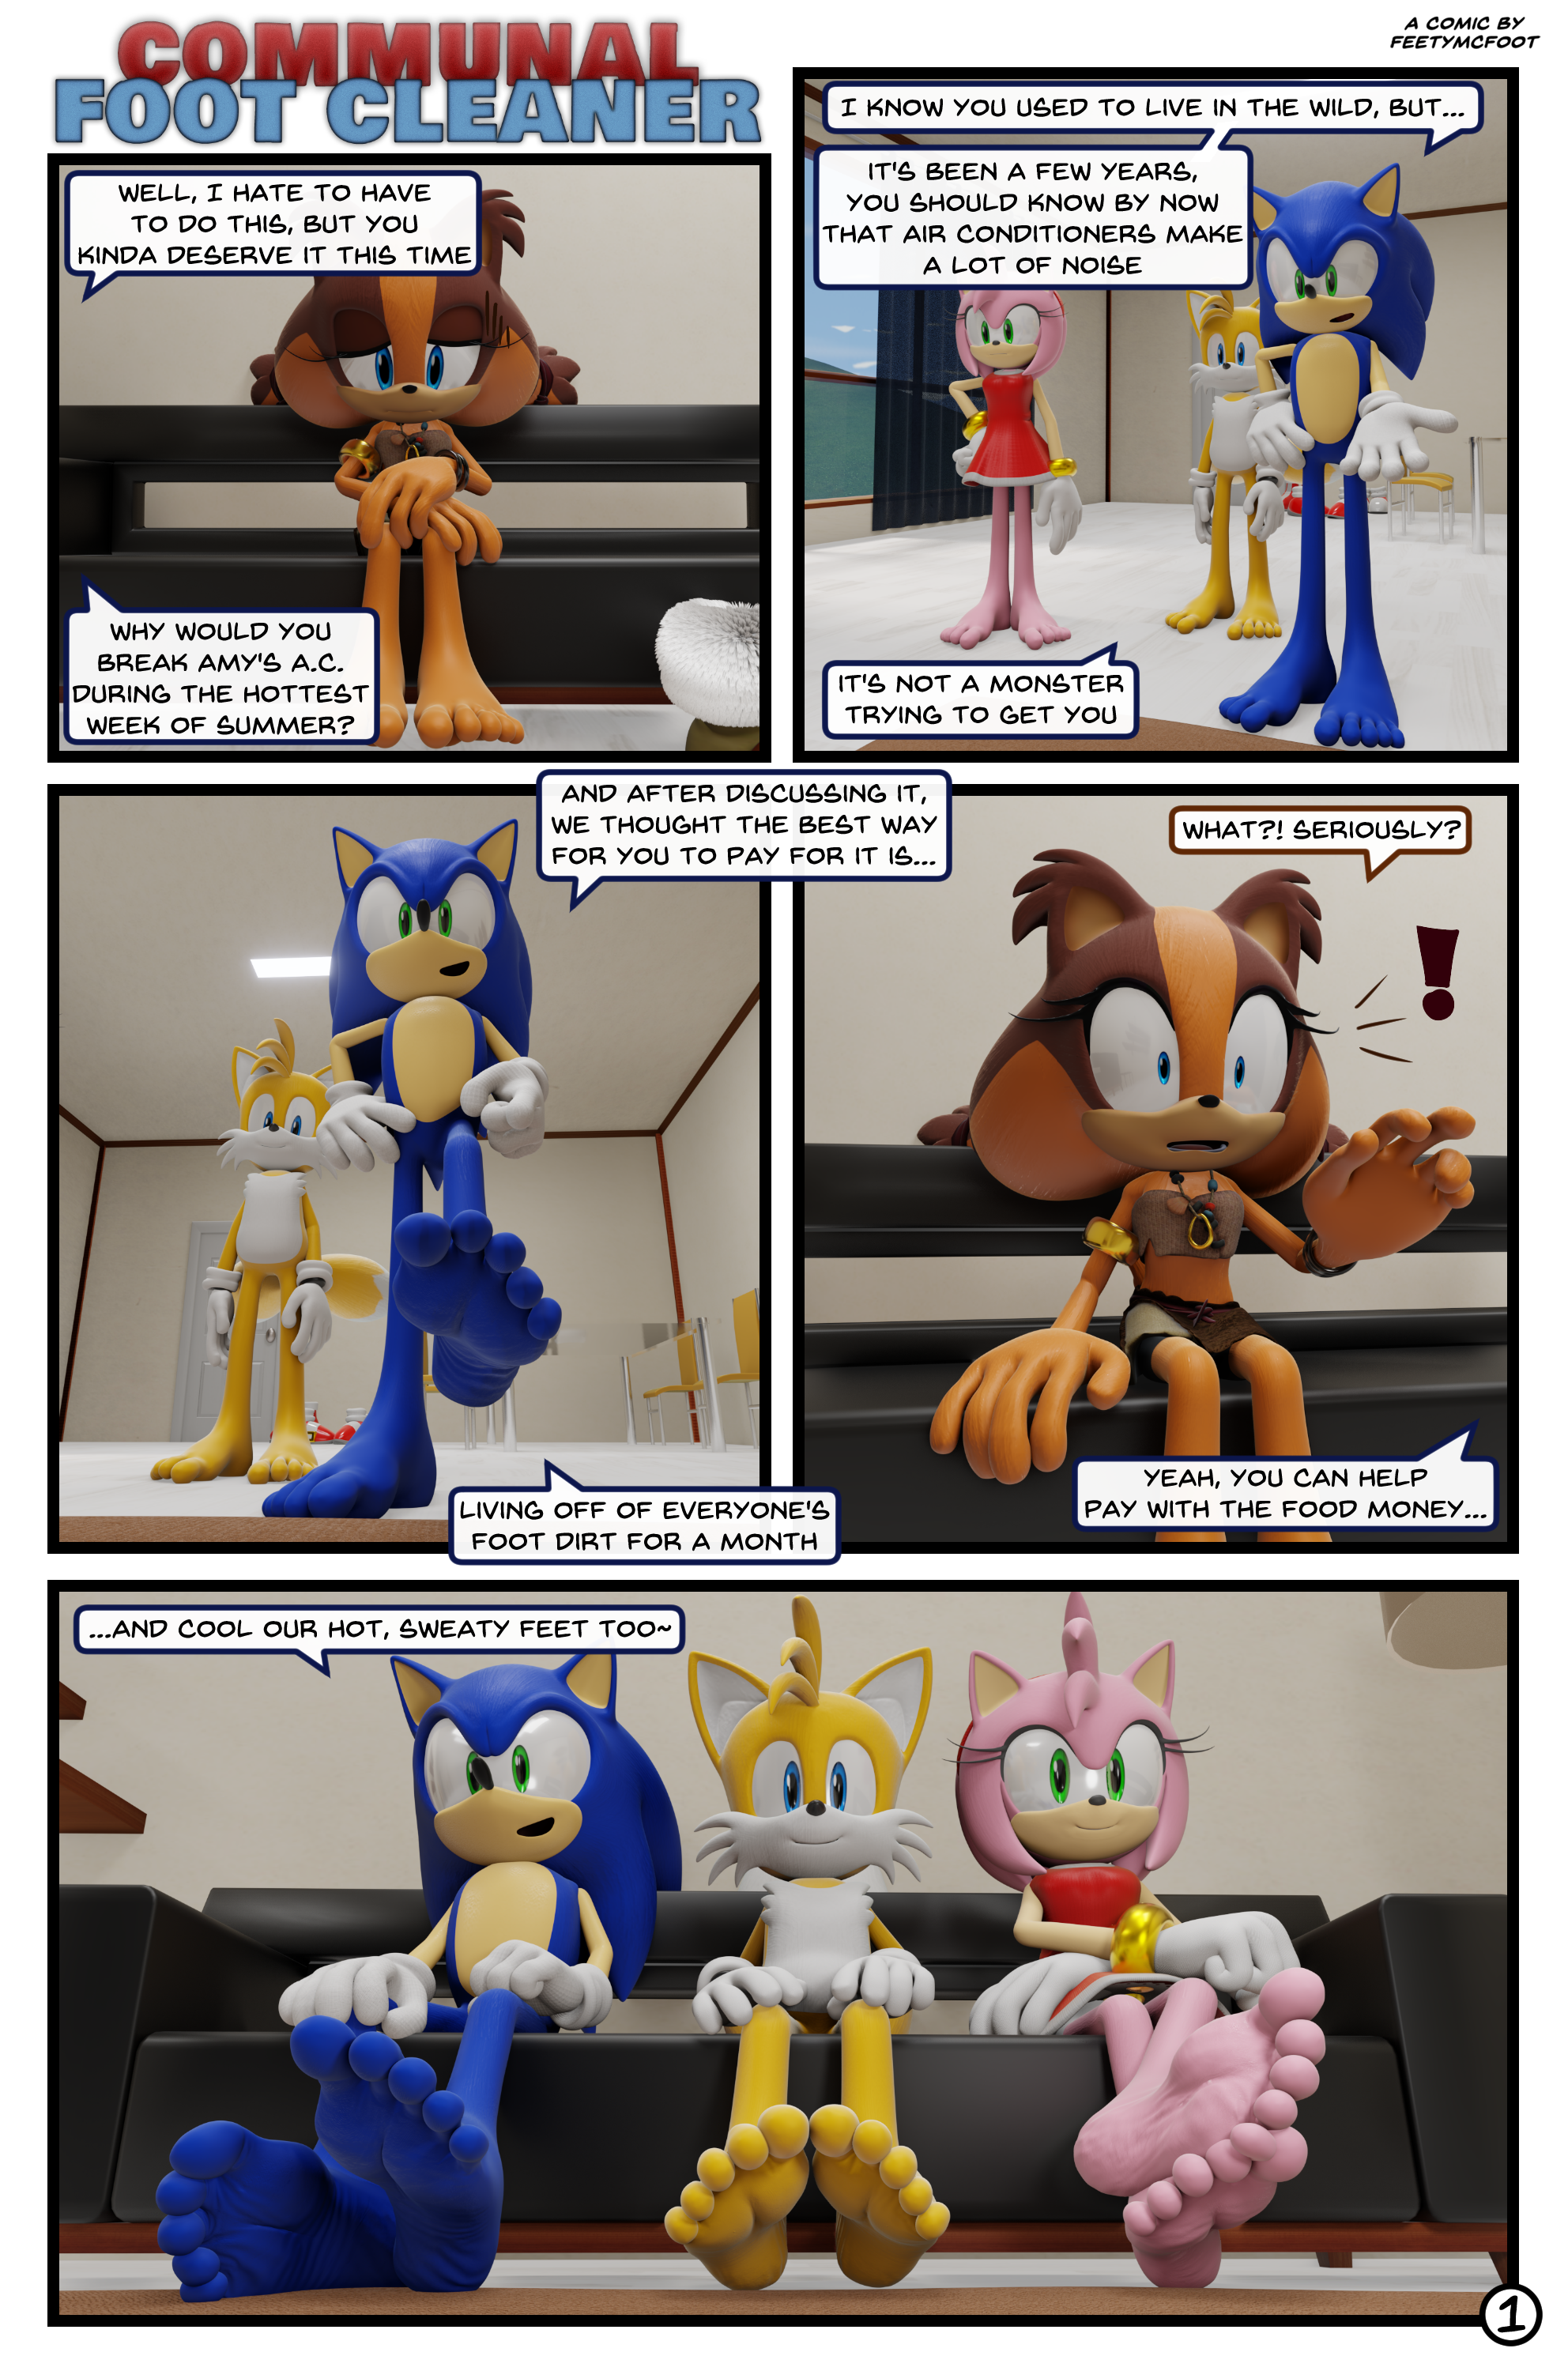 Communal Foot Cleaner - Page 1 by FeetyMcFoot -- Fur Affinity [dot] net